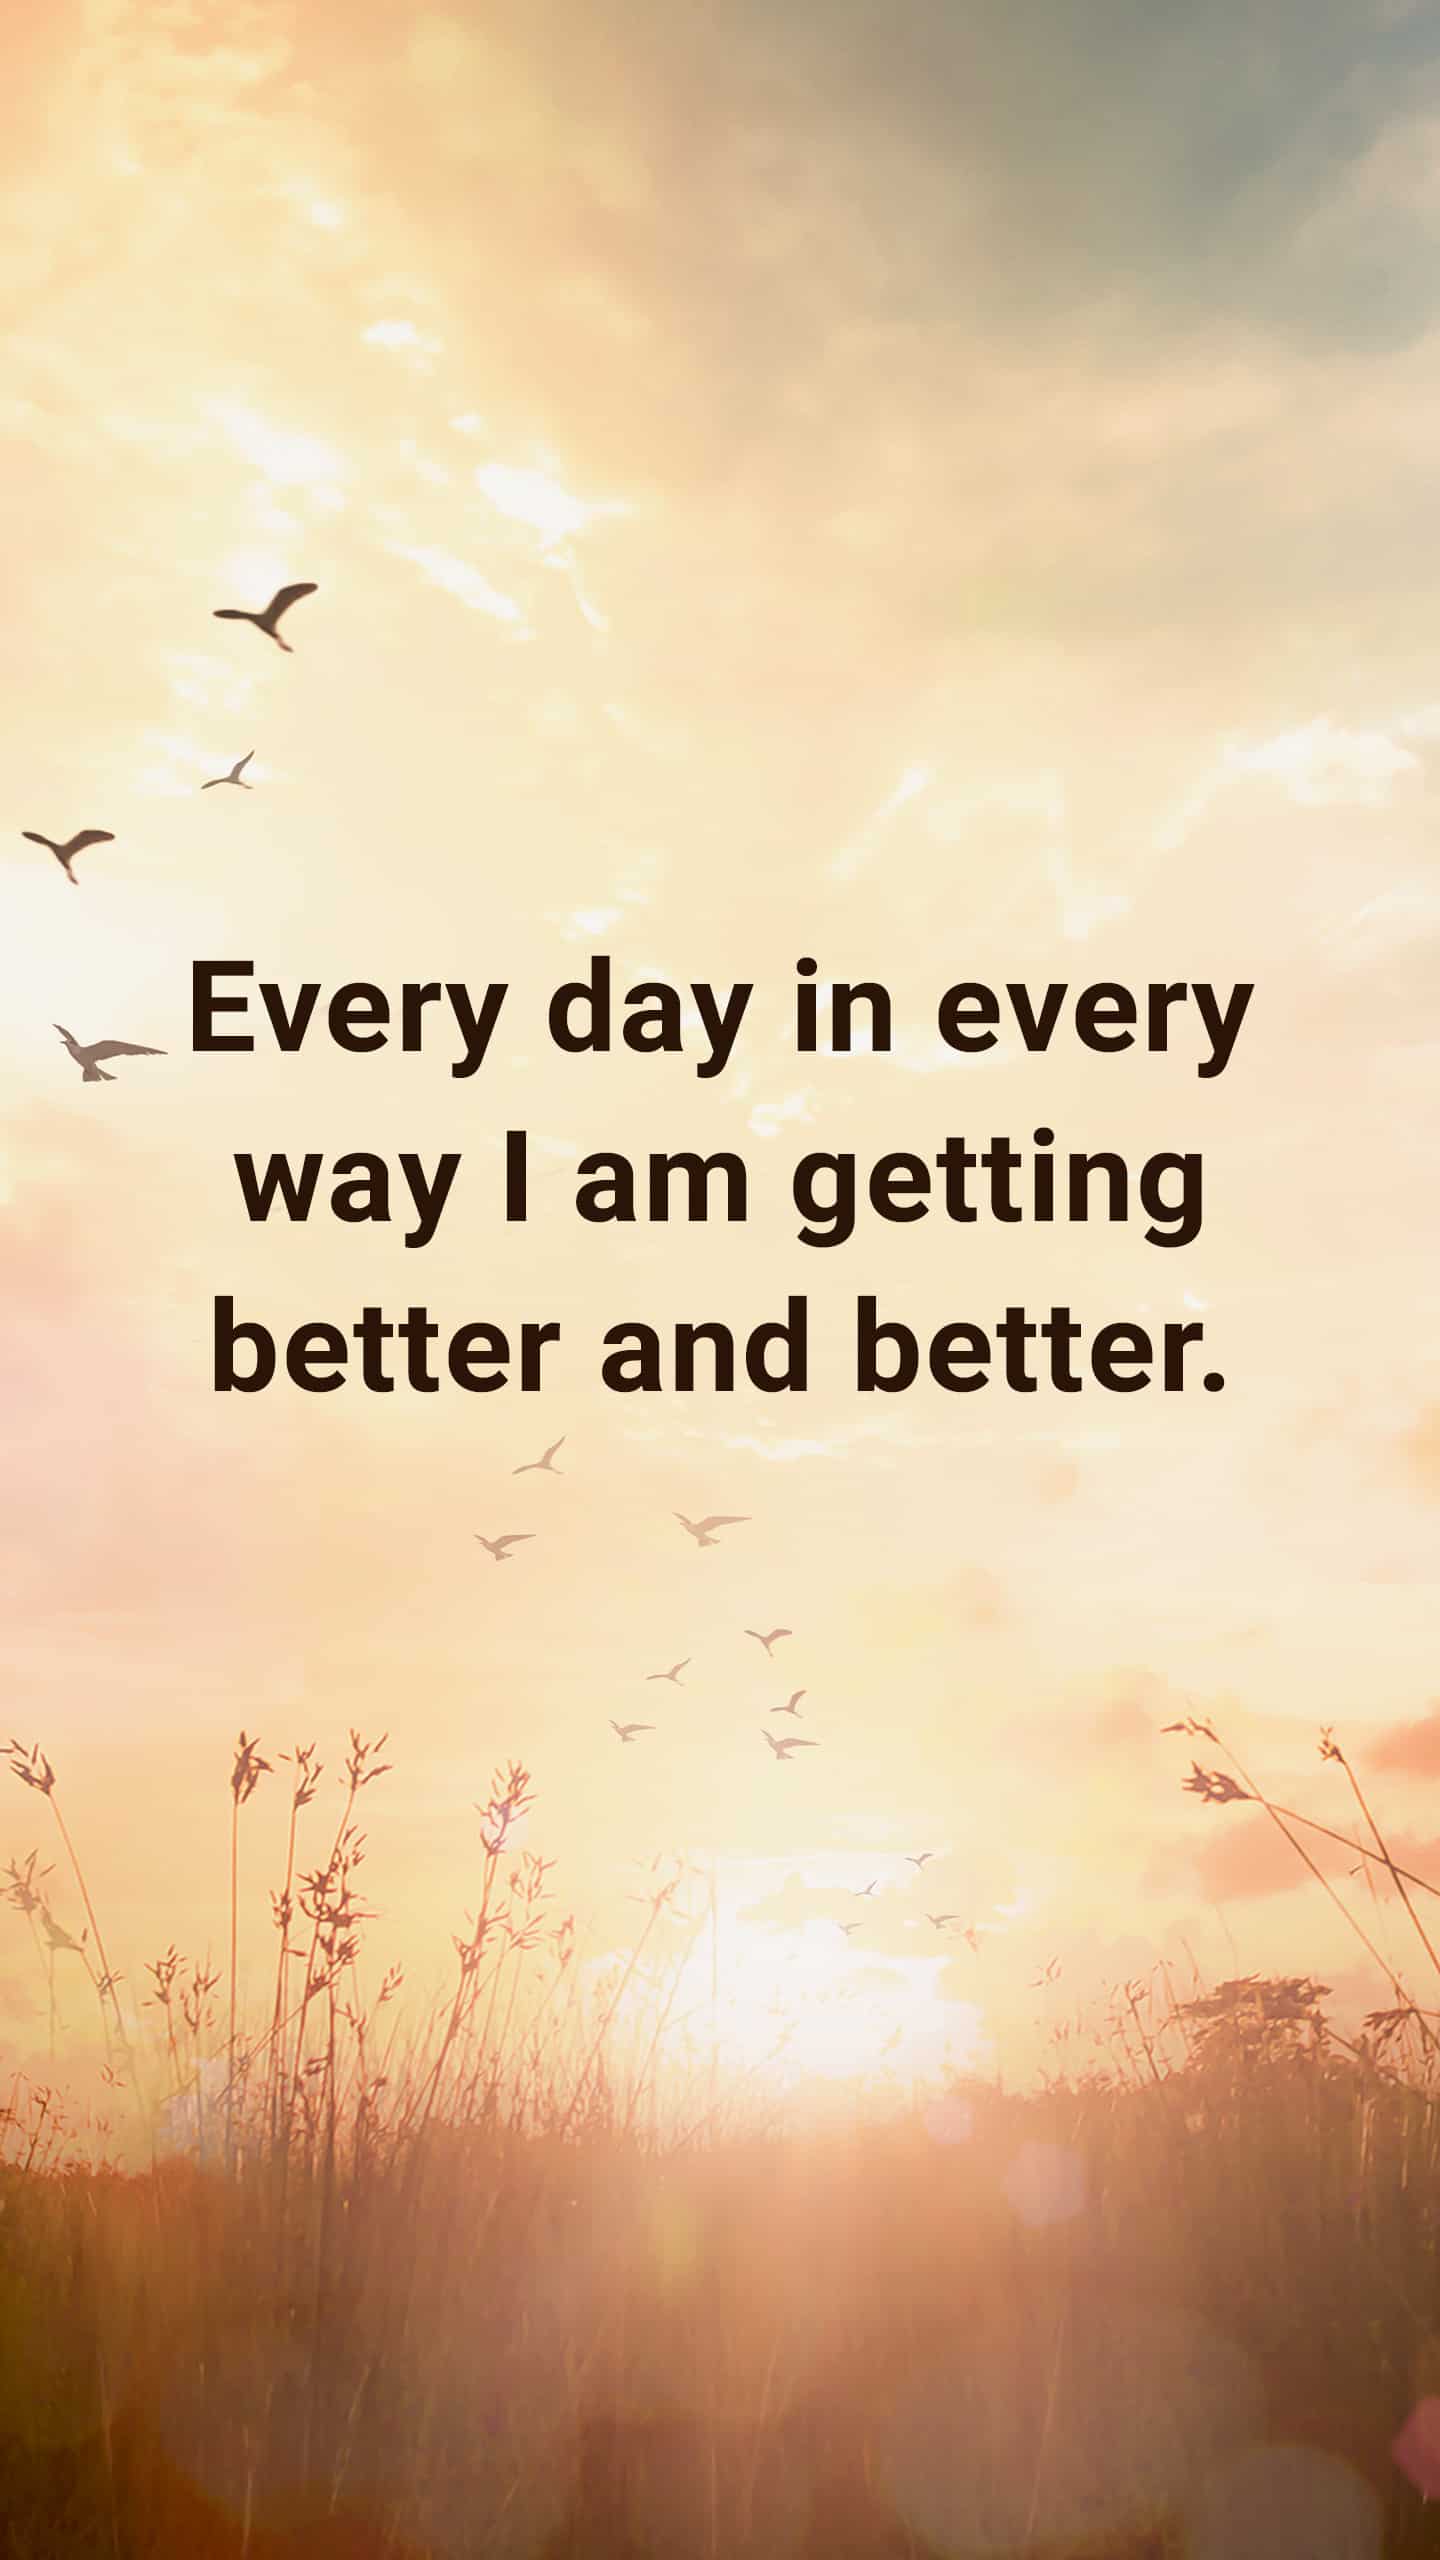 20 Daily Positive Affirmations to Create an Extraordinary Life in 2020